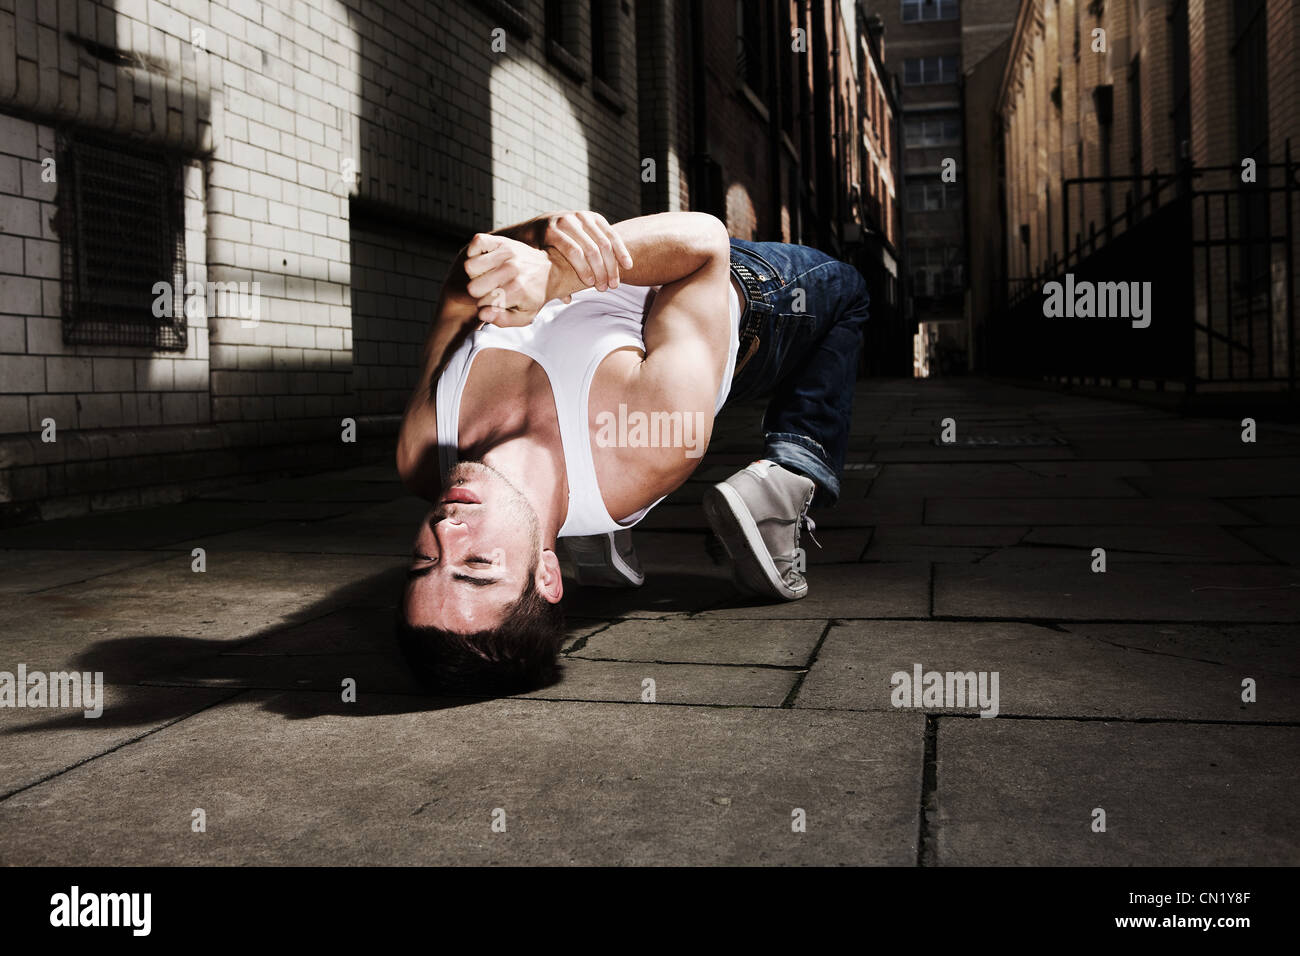 Young man breakdancing Stock Photo